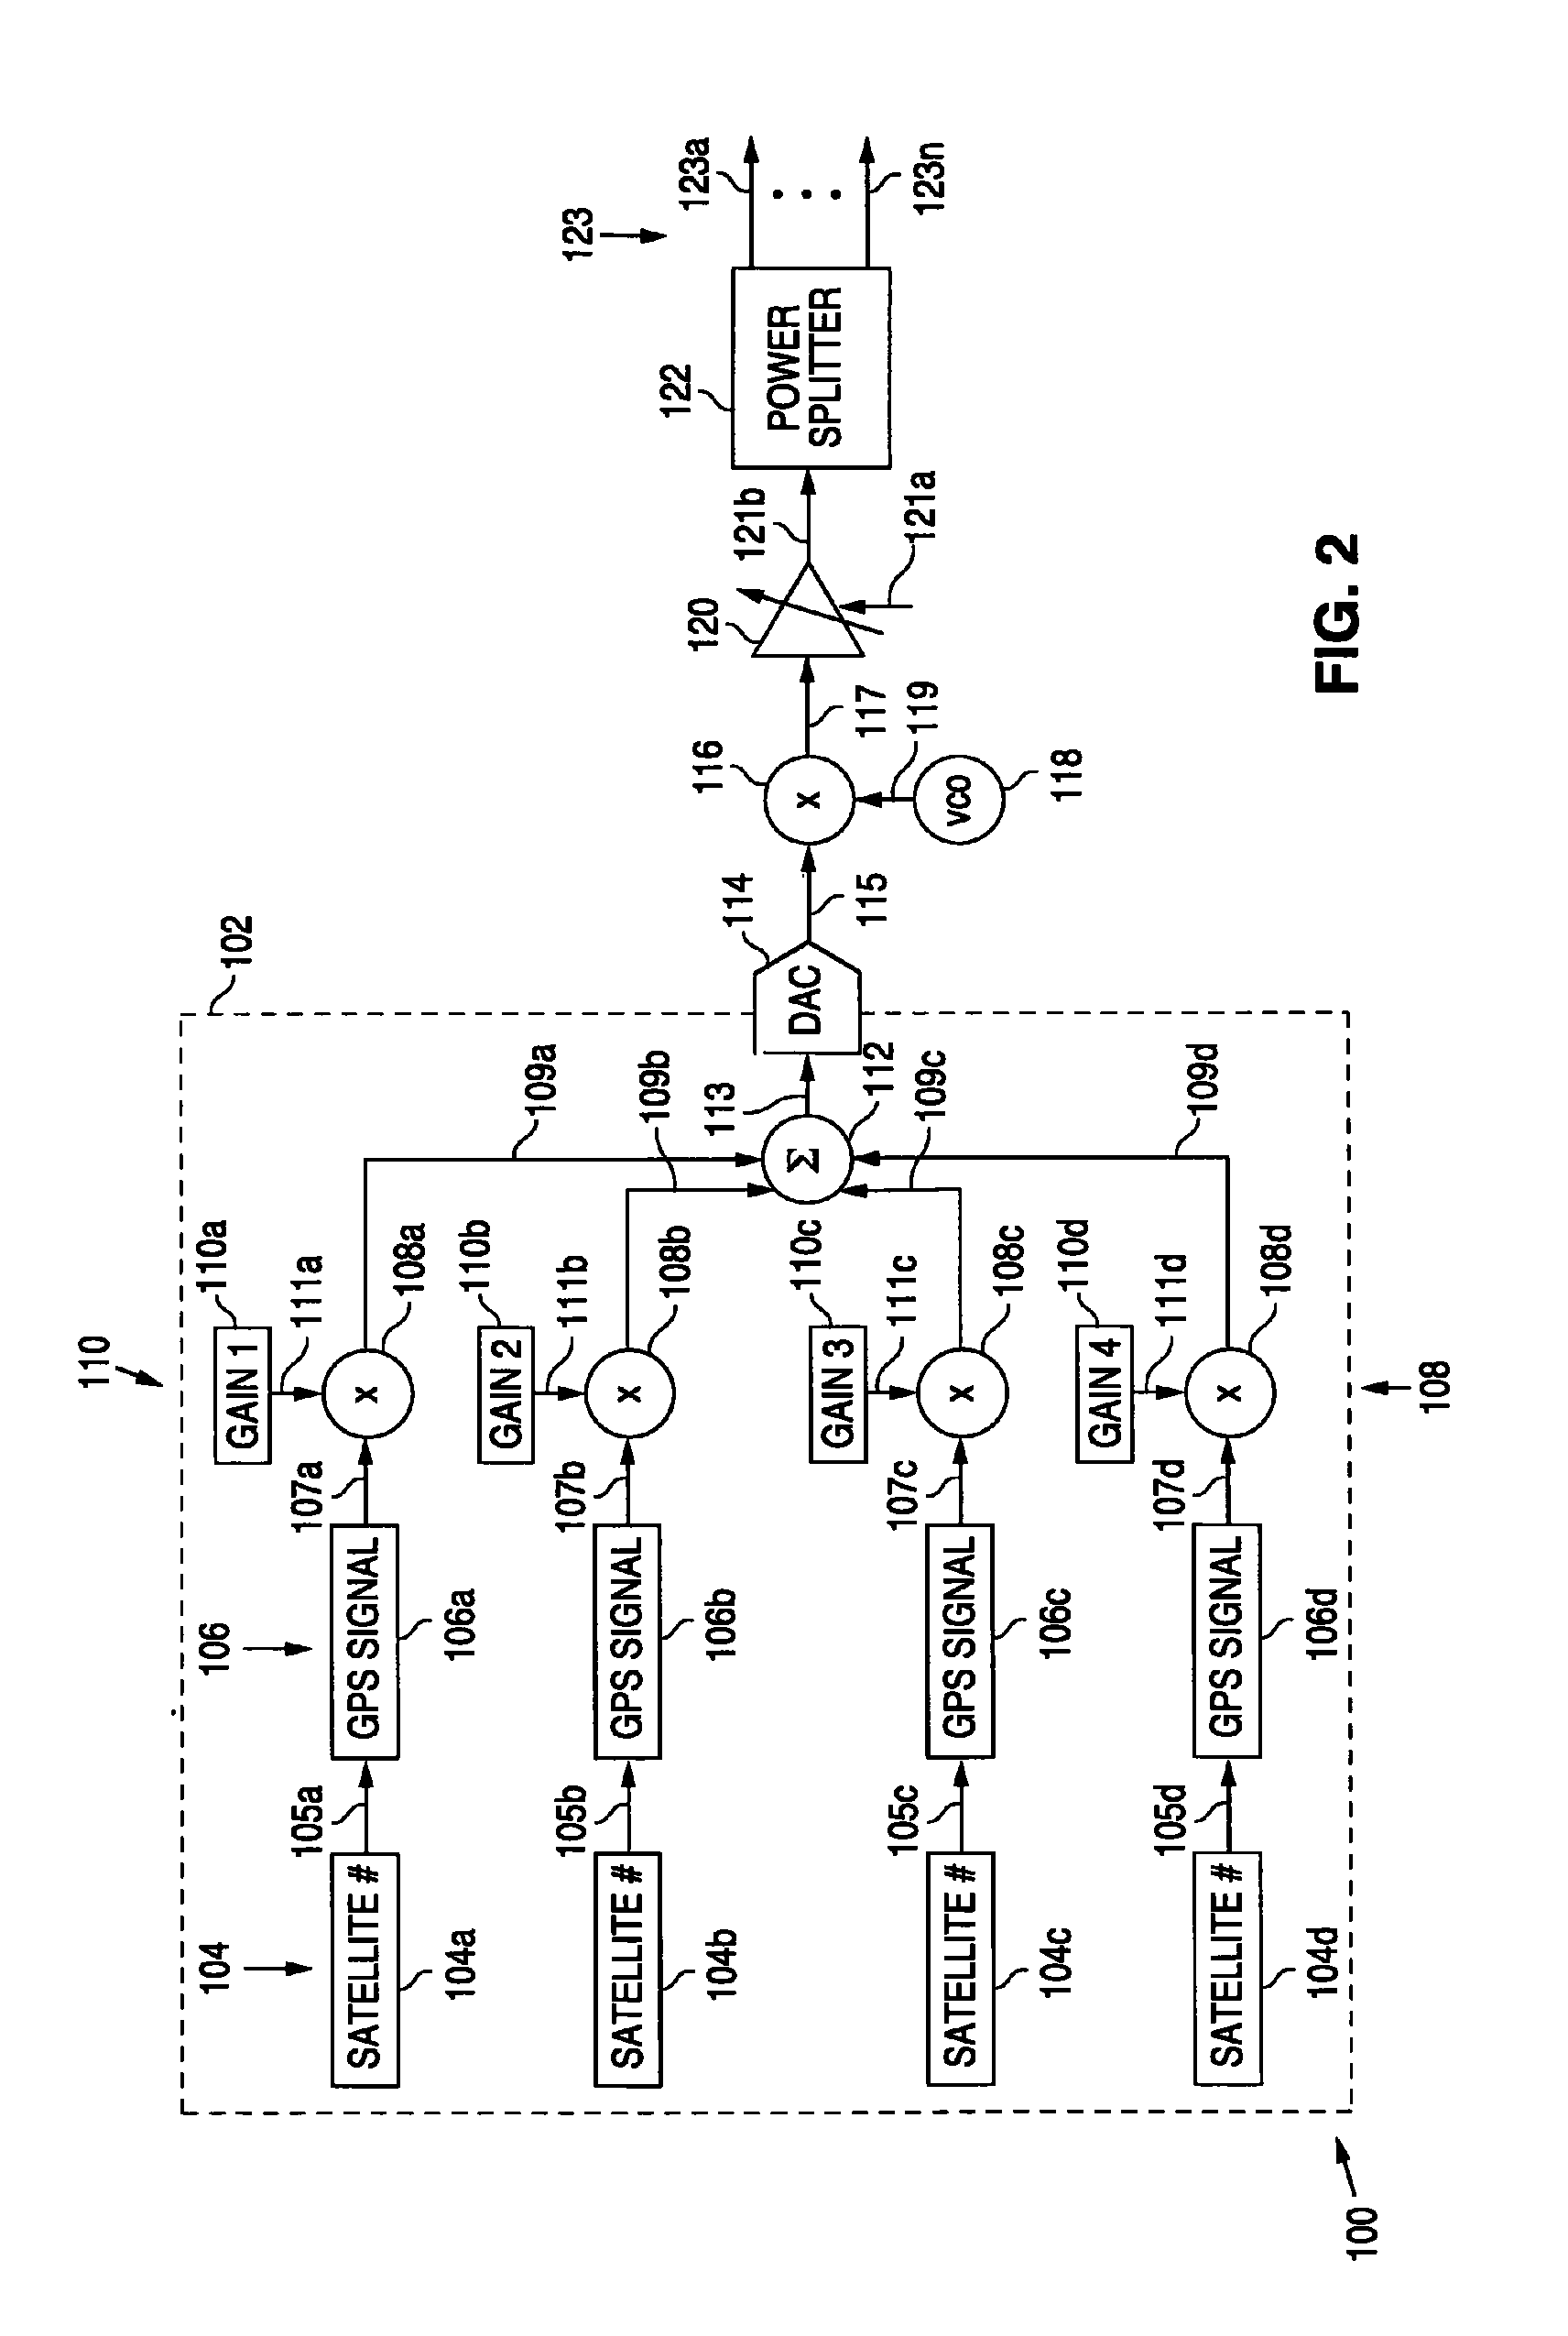 Radio frequency (RF) signal generator and method for providing test signals for testing multiple RF signal receivers